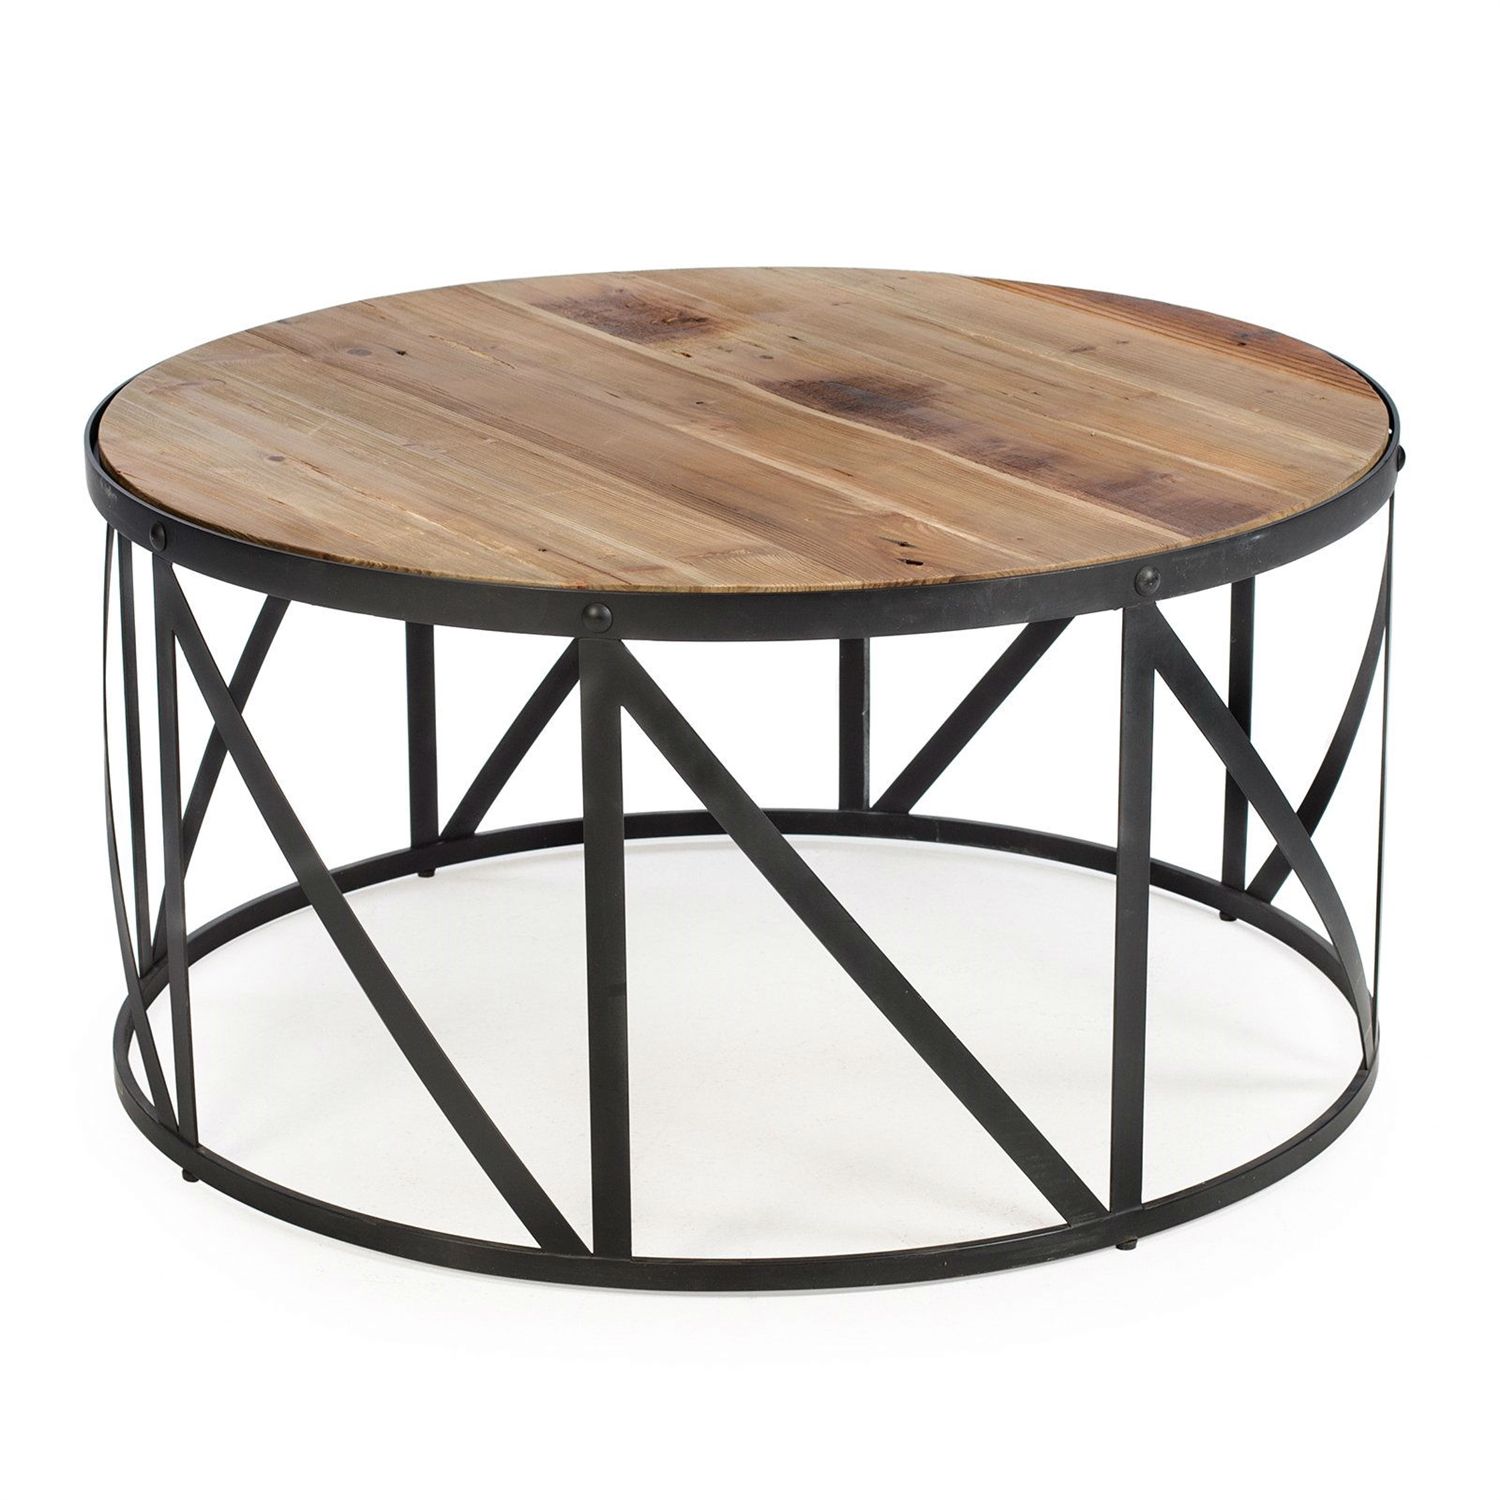 Round Metal And Wood Drum Shaped Coffee Table With Round Iron Coffee Tables (View 3 of 15)